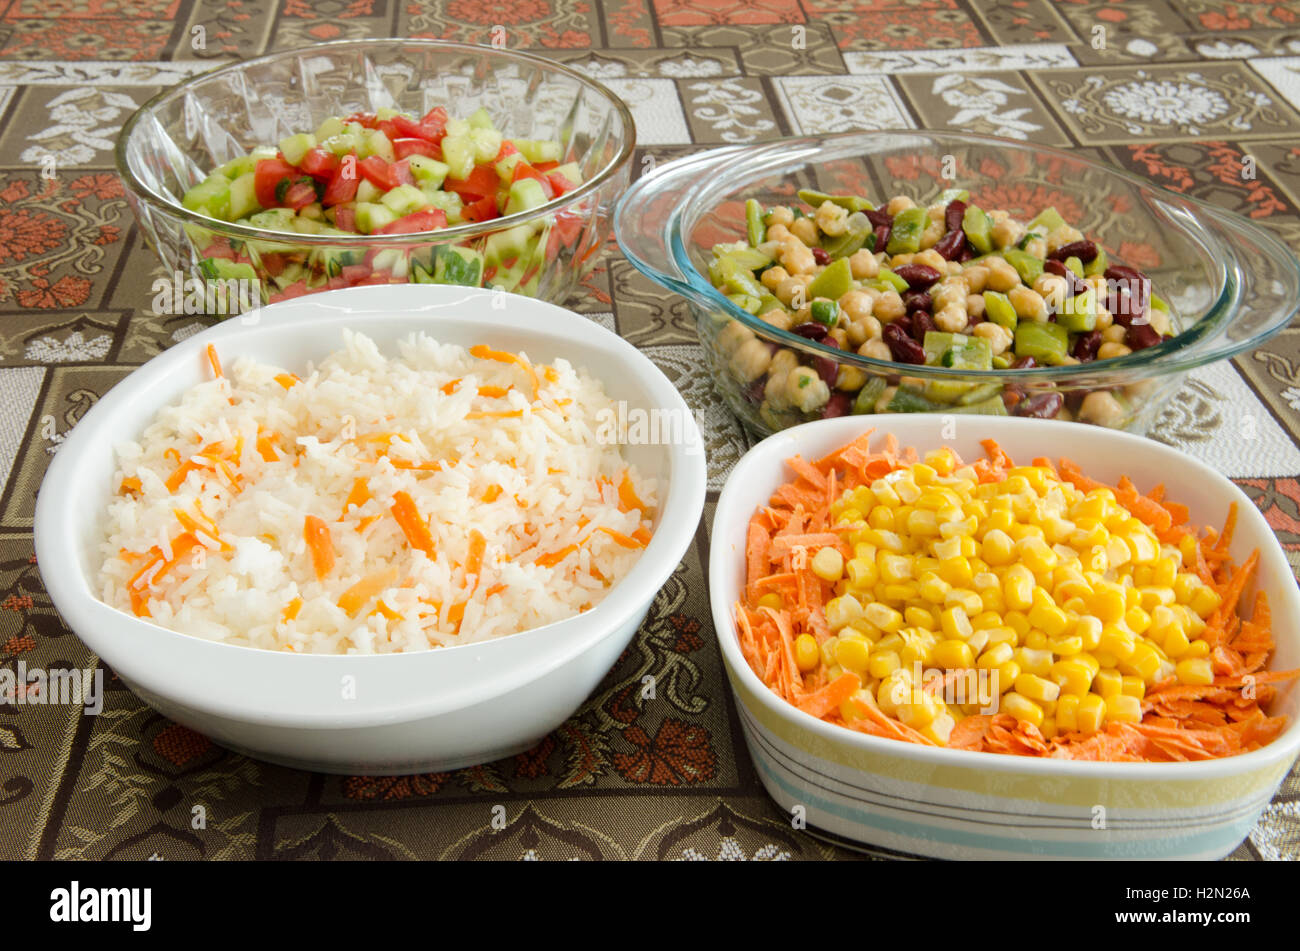 dishes of food items, steamed rice and carrots, three bean salad, corn and carrots and cucumber and tomato salad Stock Photo